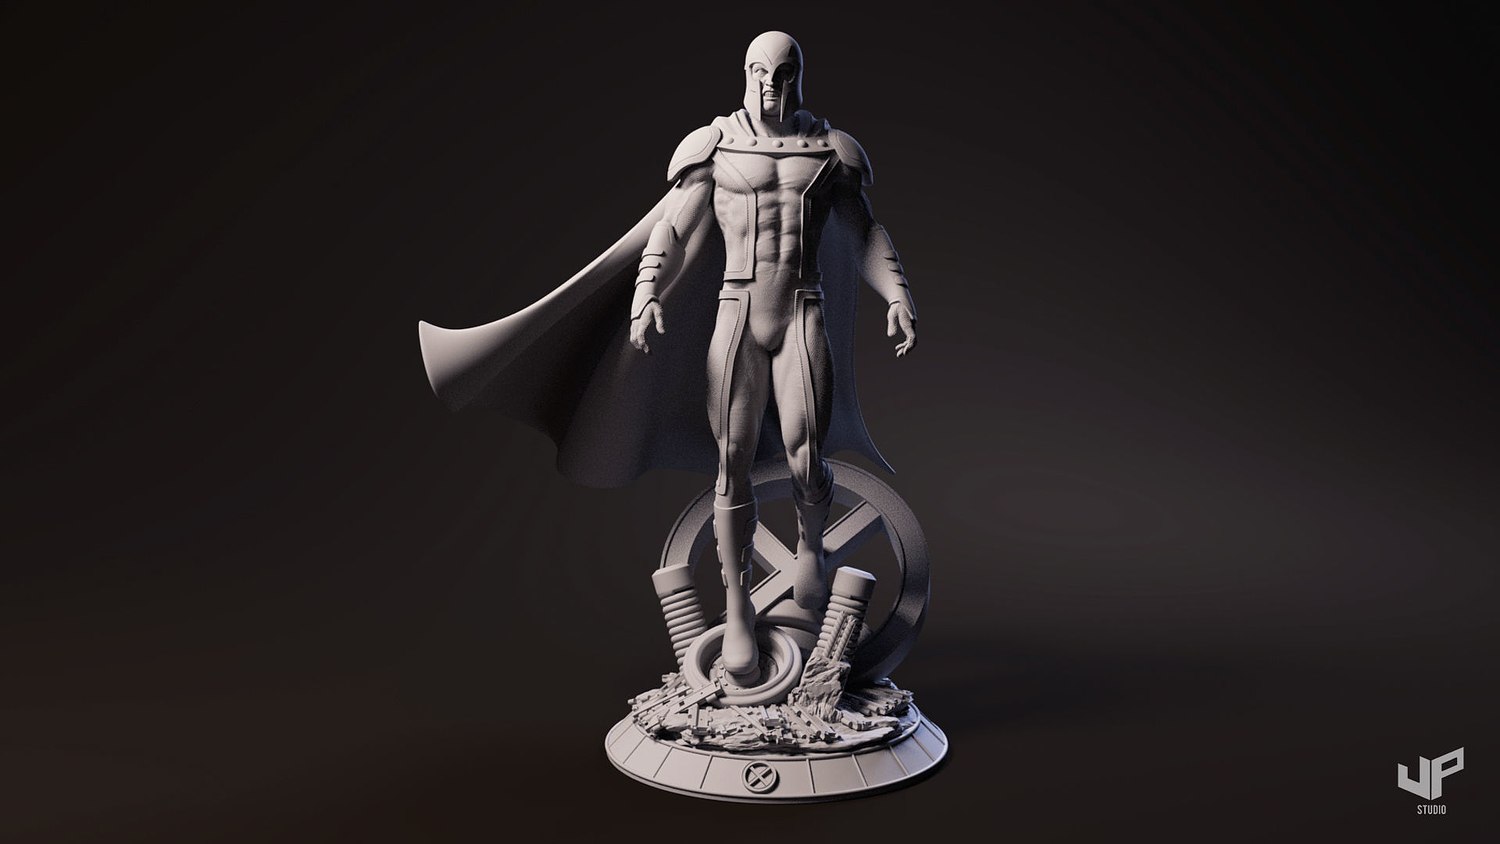 Magneto Standing Pose from X-men